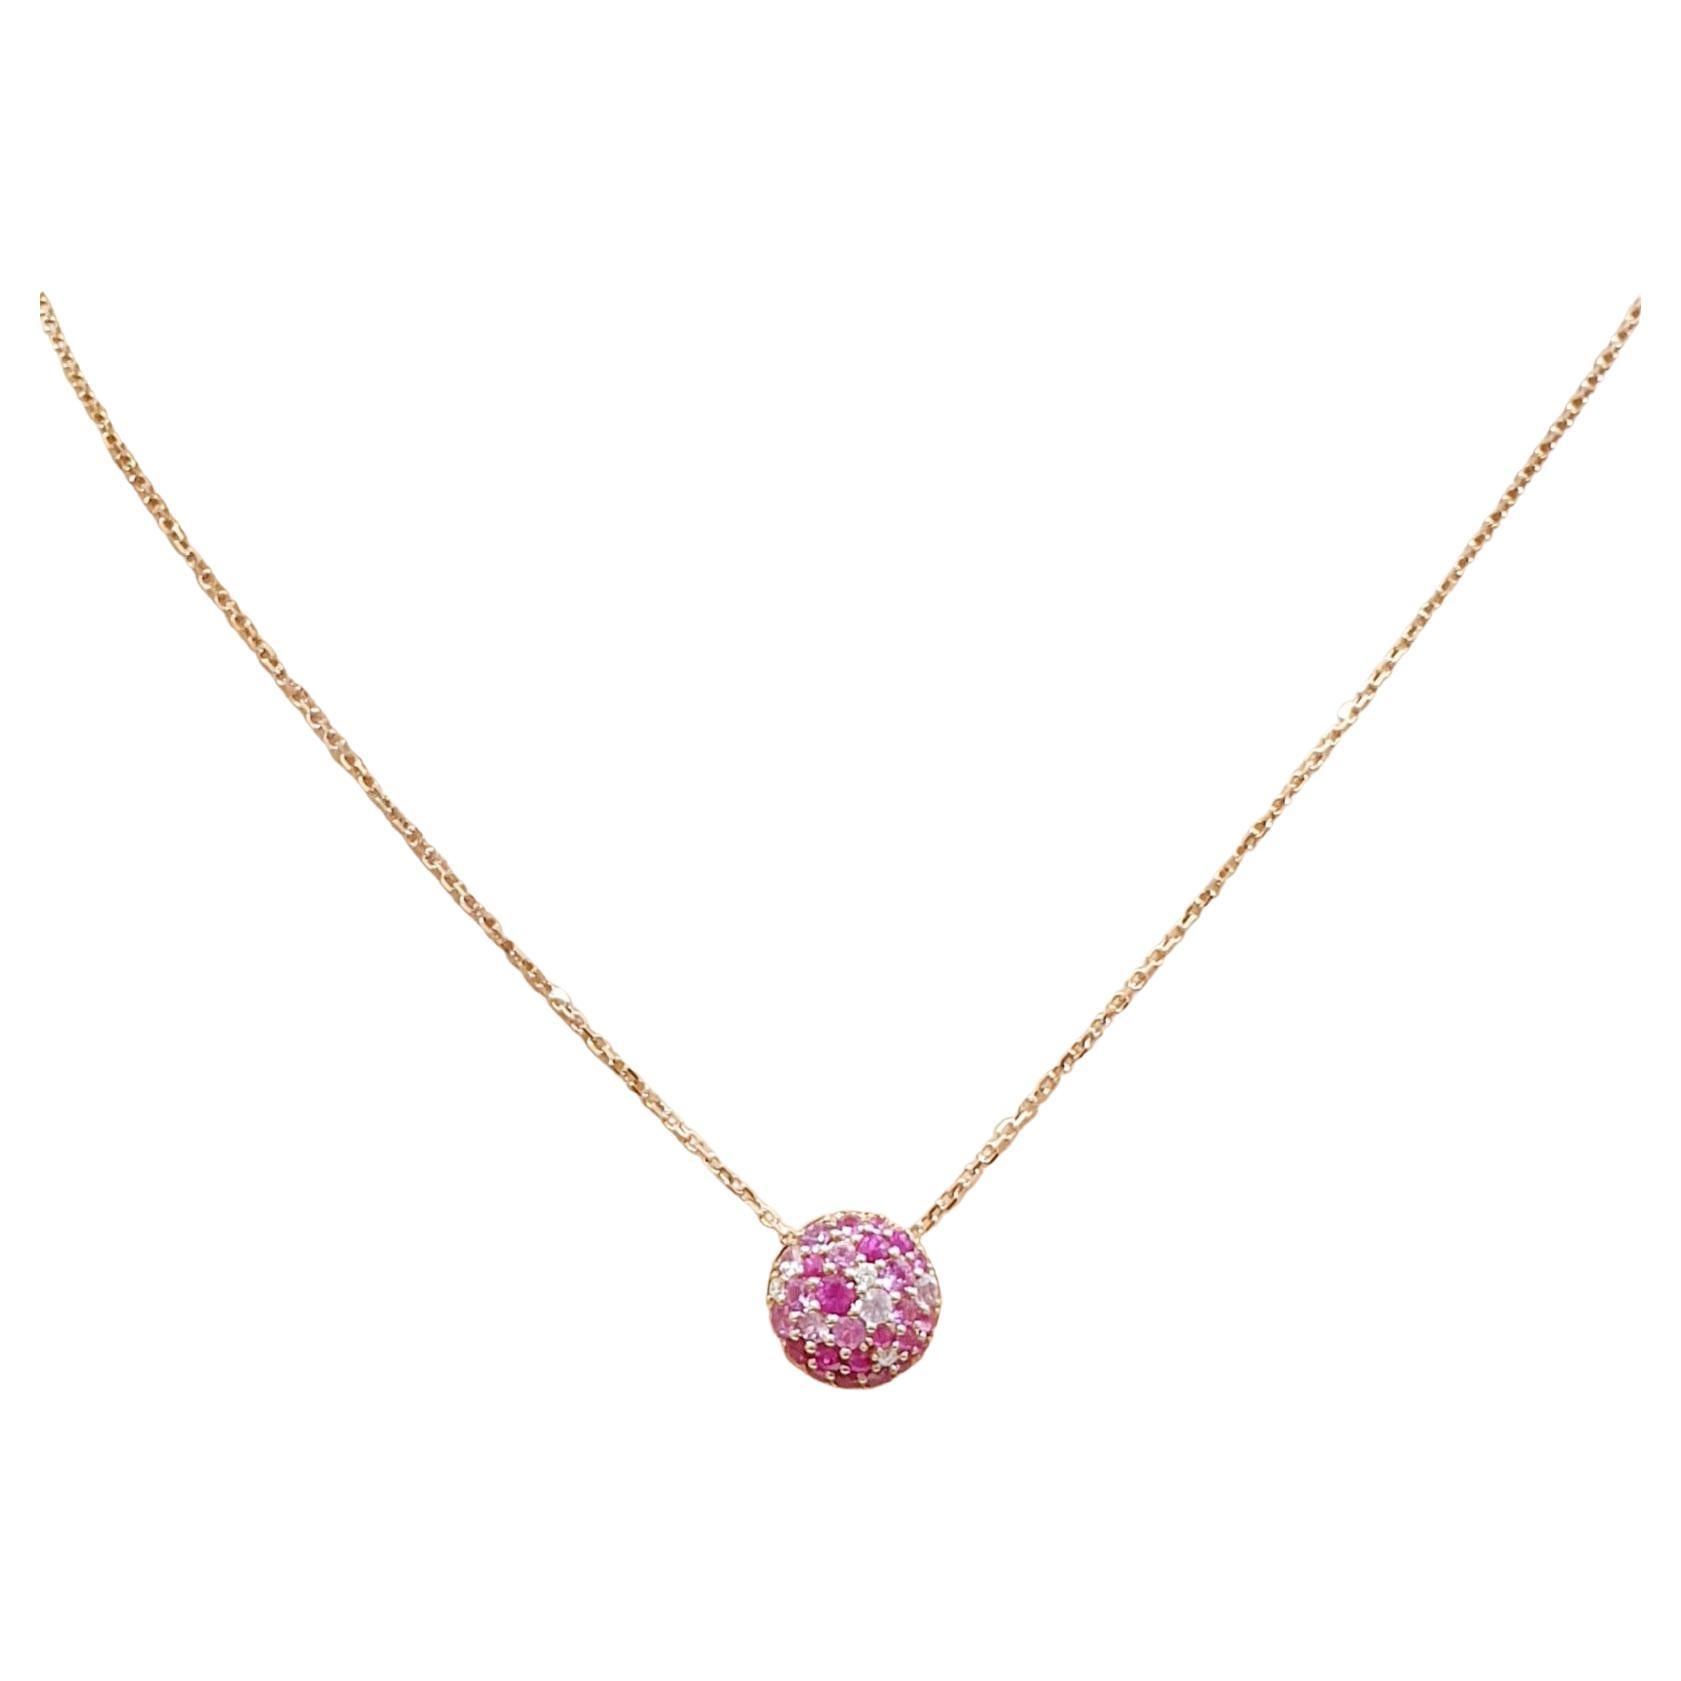  18 karat Rose Gold Chain with pavée of Ruby and Diamond Pendant For Sale